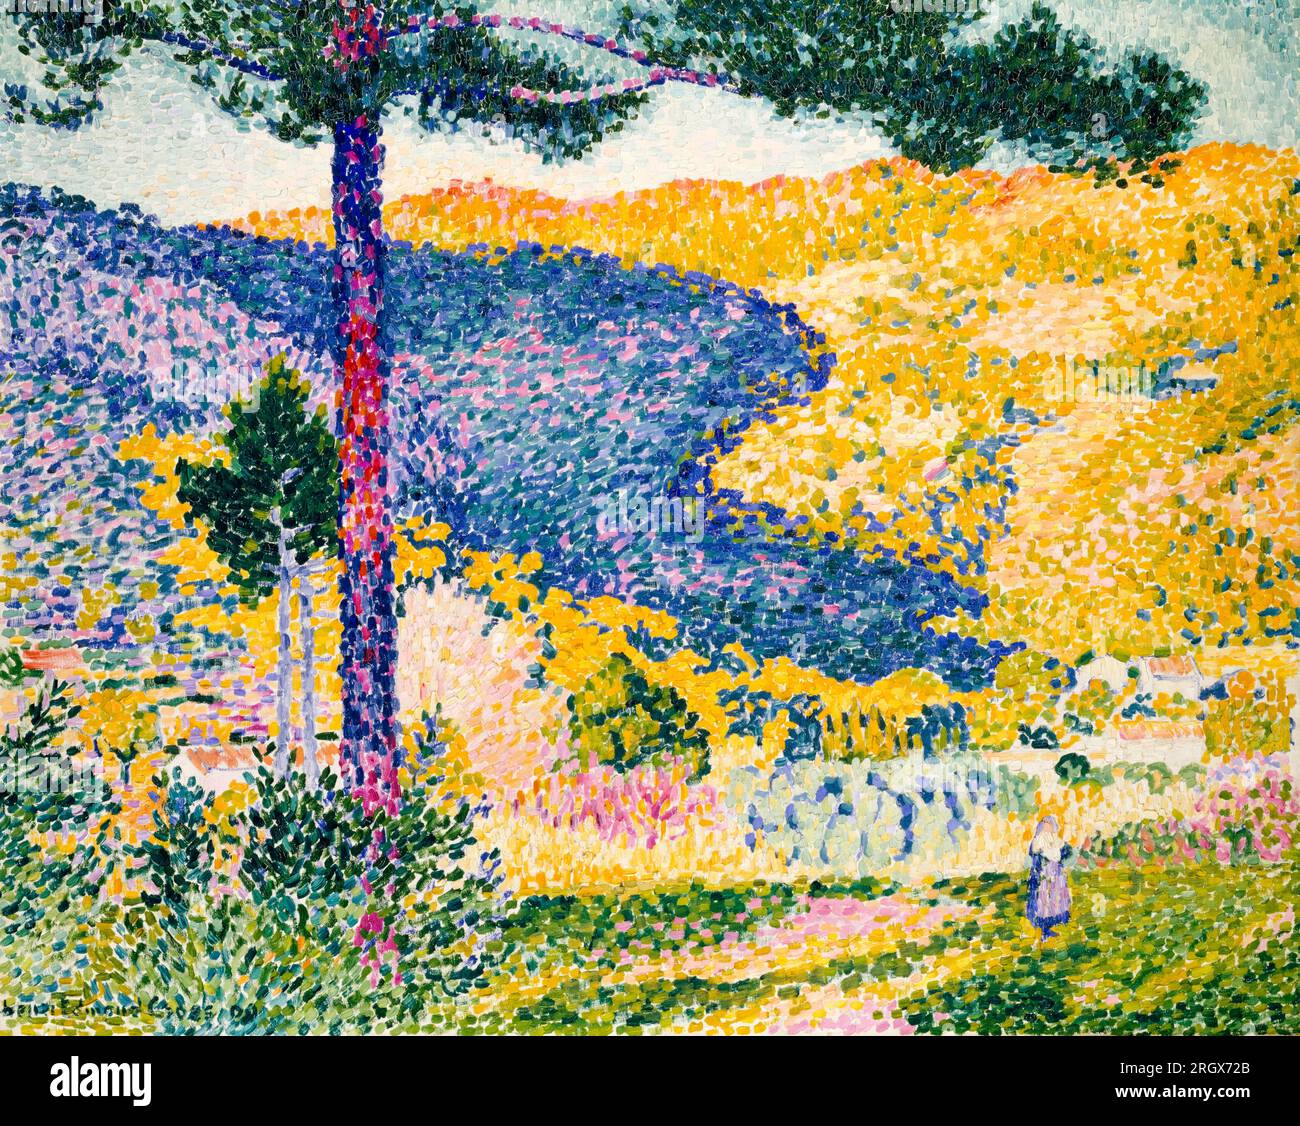 Henri Edmond Cross, Valley with Fir (Shade on the Mountain), landscape painting 1909 Stock Photo